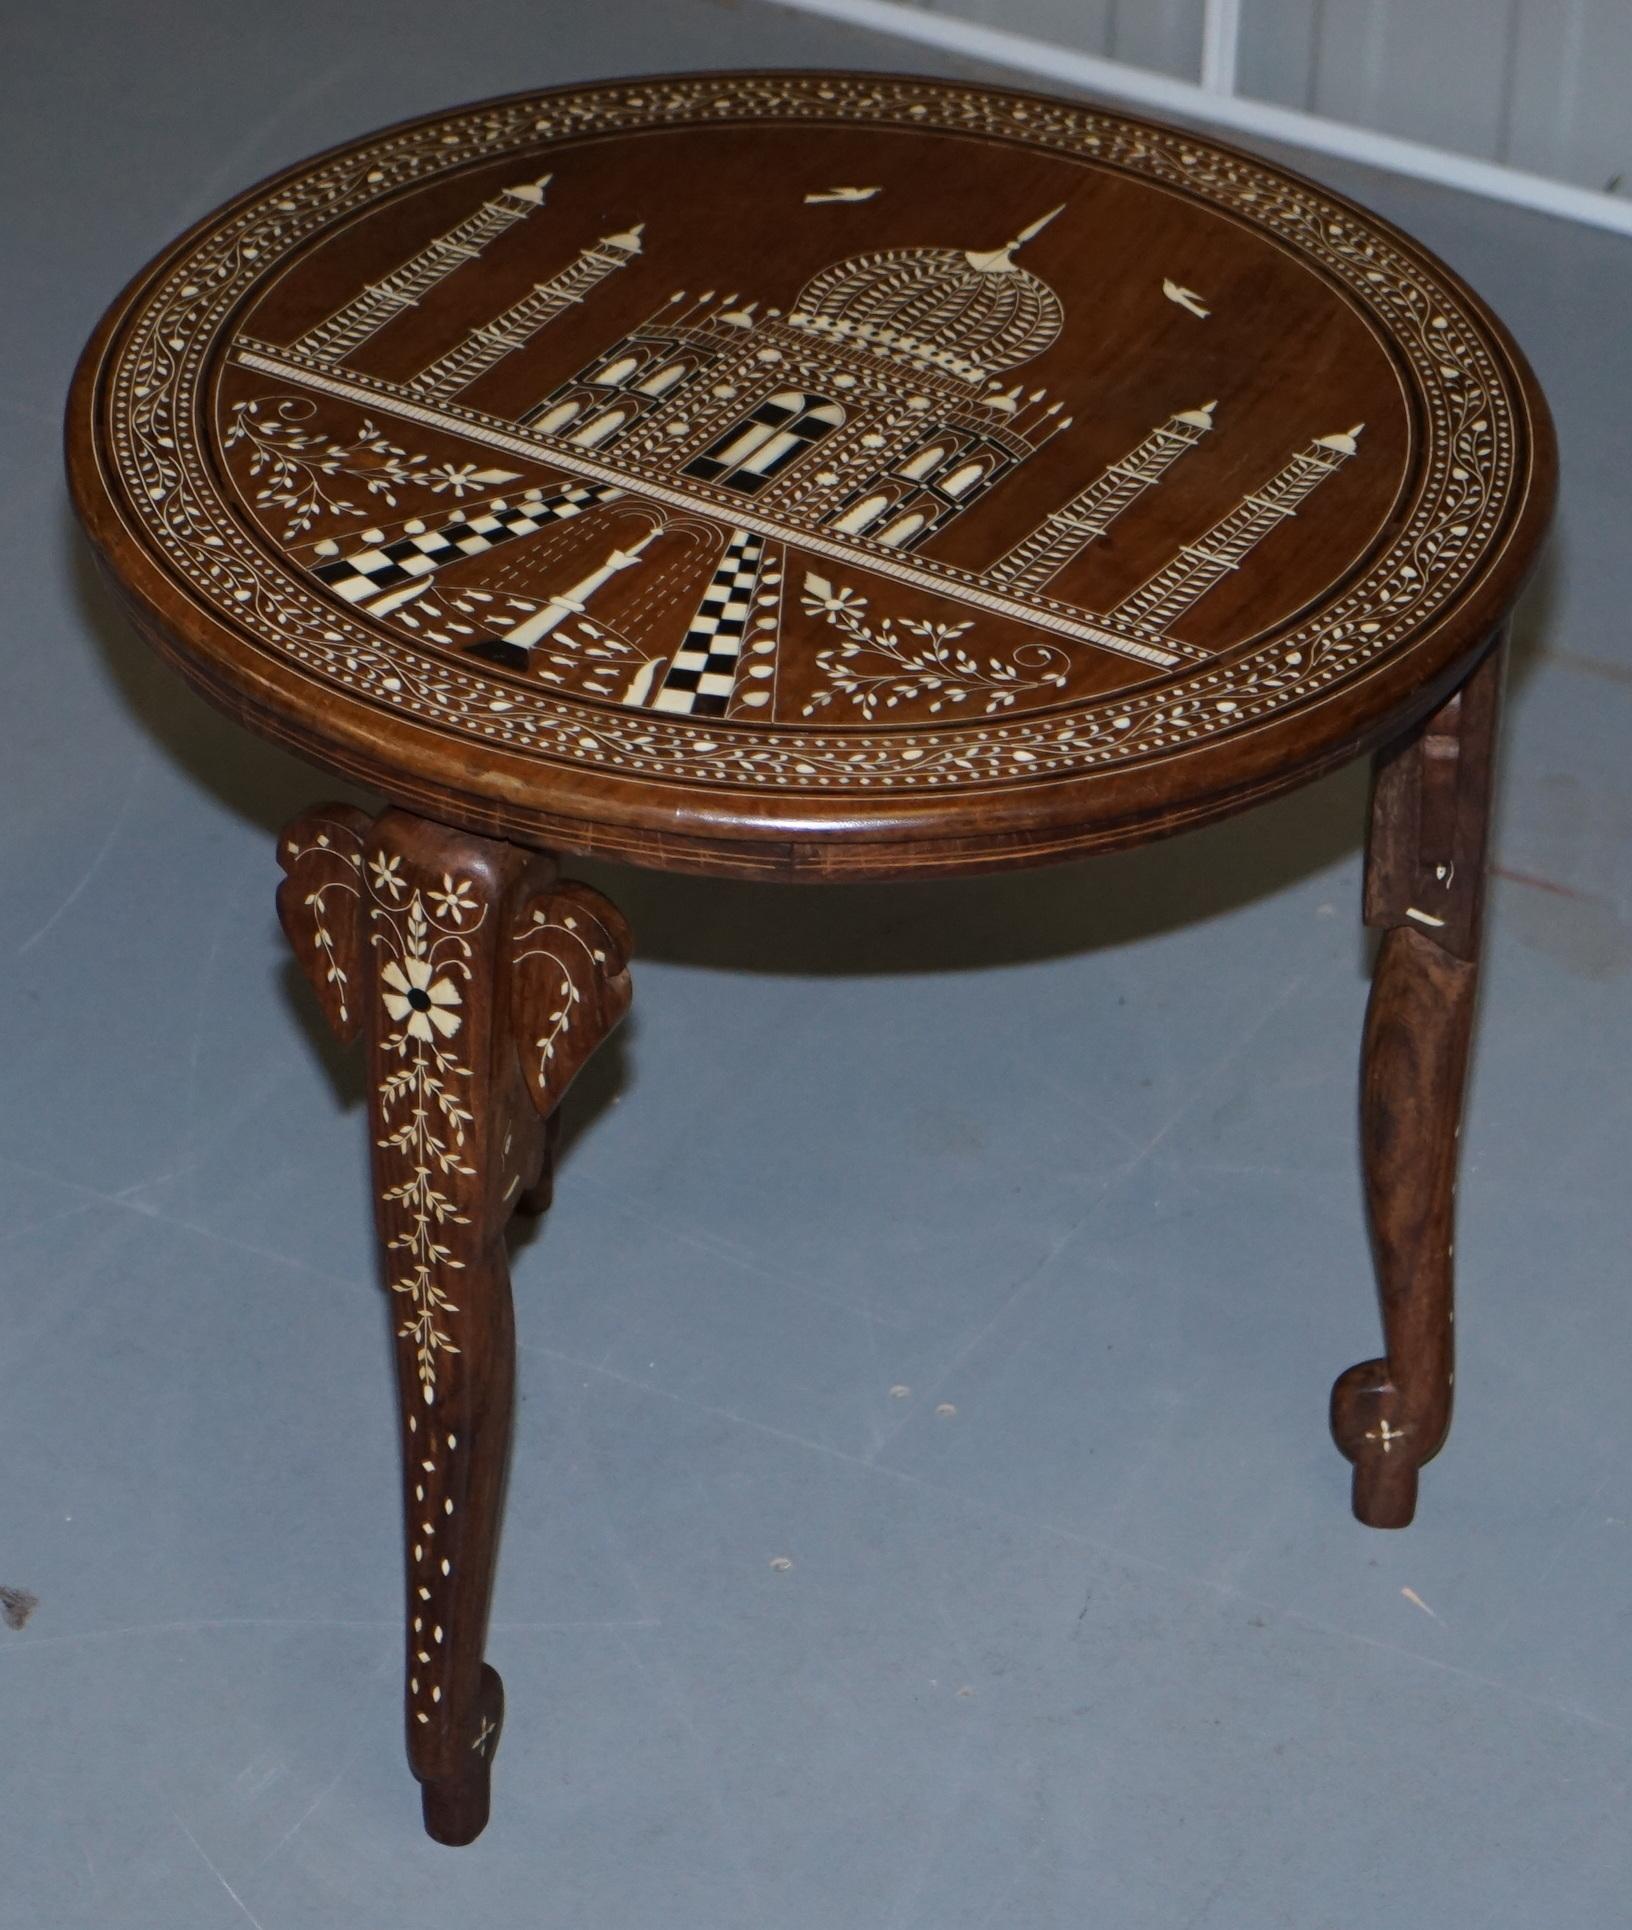 We are delighted to offer for sale this stunning and very rare Anglo Indian hand carved rosewood and inlaid side table depicting the Taj Mahal

I have two other versions of this table listed under my other items, one is the same as this but